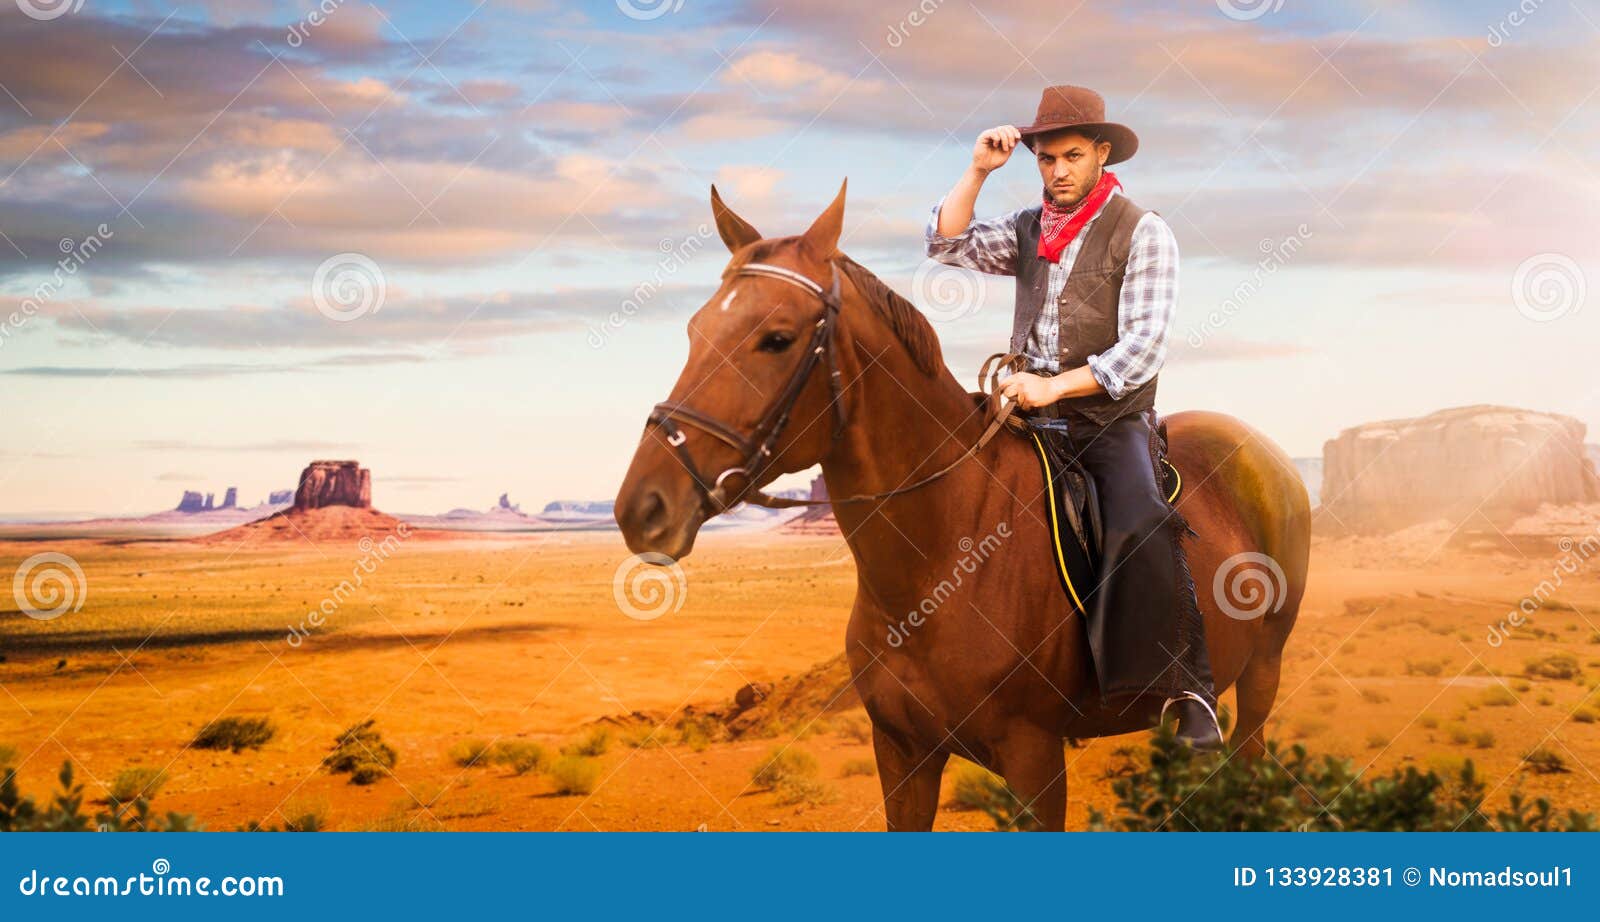 Riding Horses And Western Horses